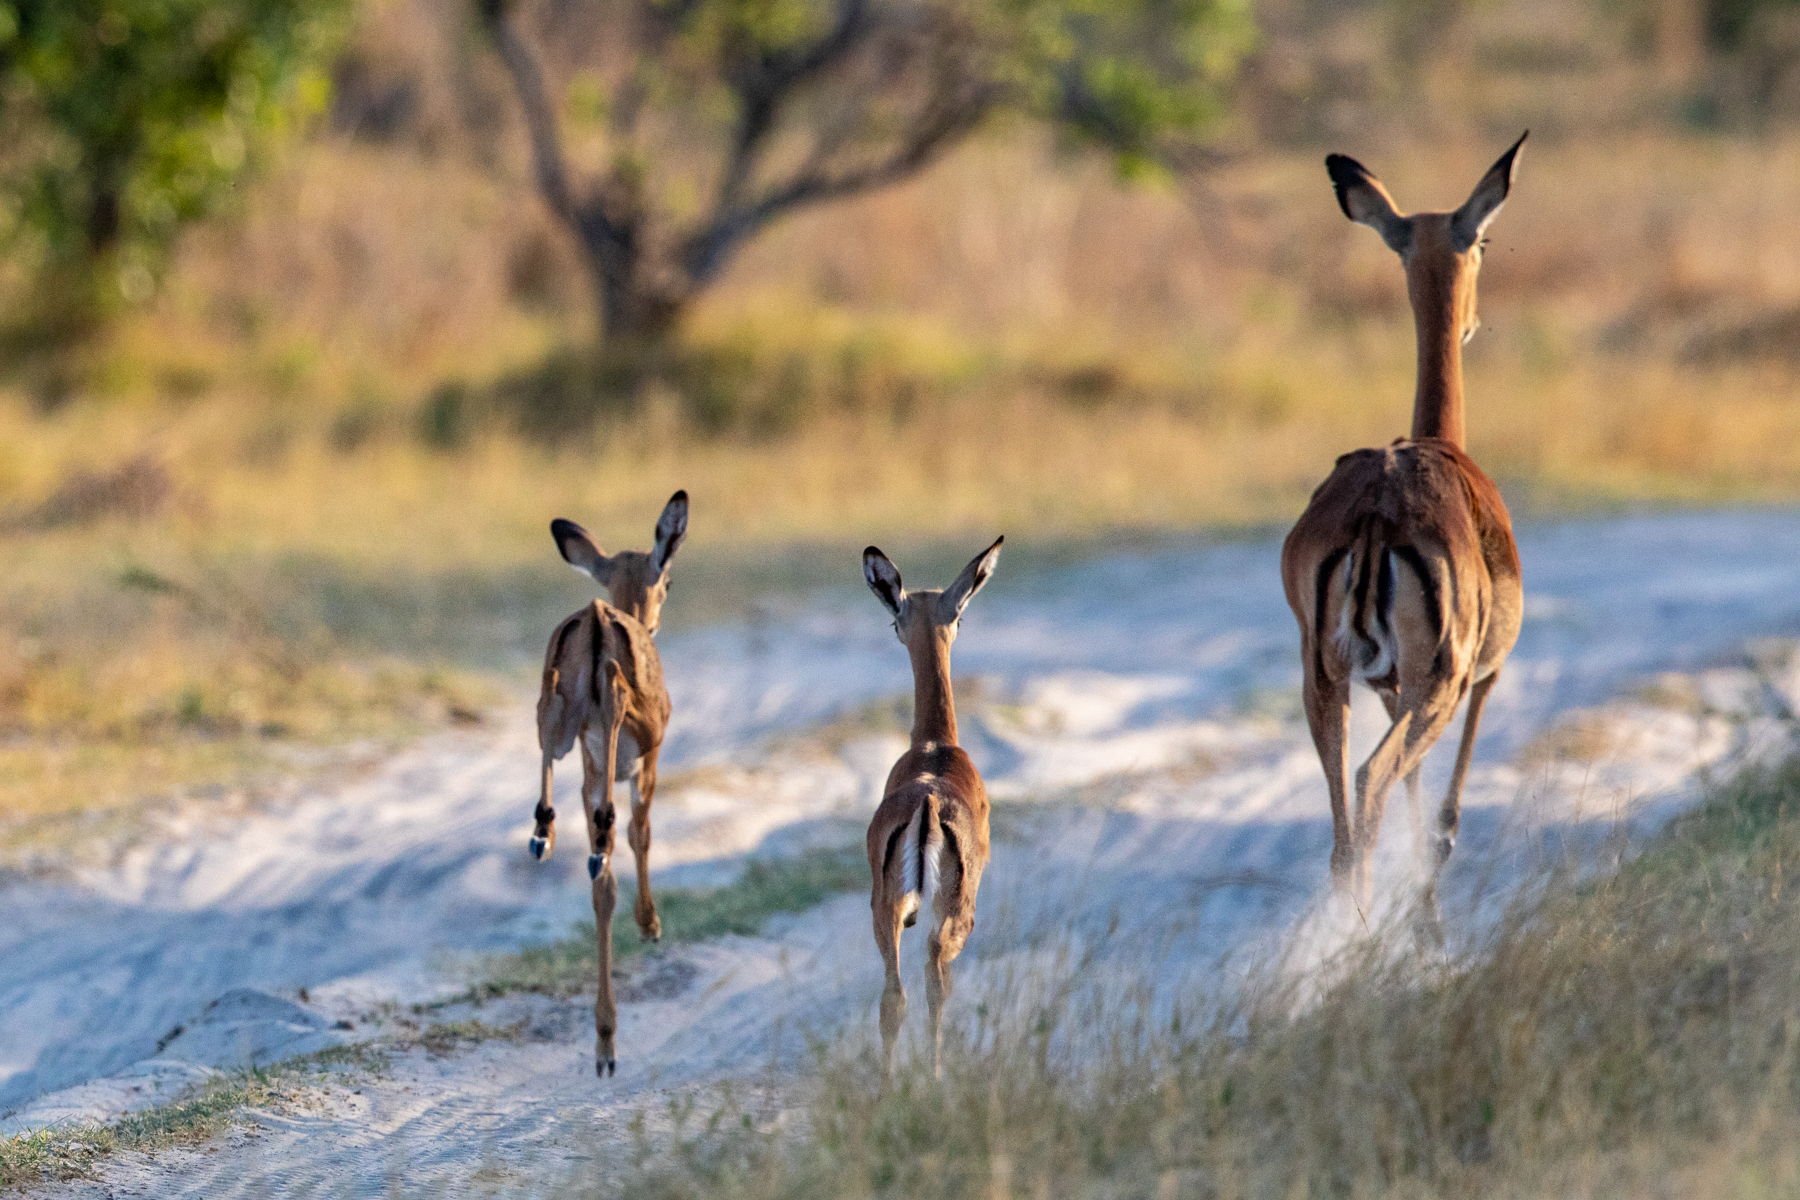 An Impala family race away, one of the calves 'pronking' as it goes